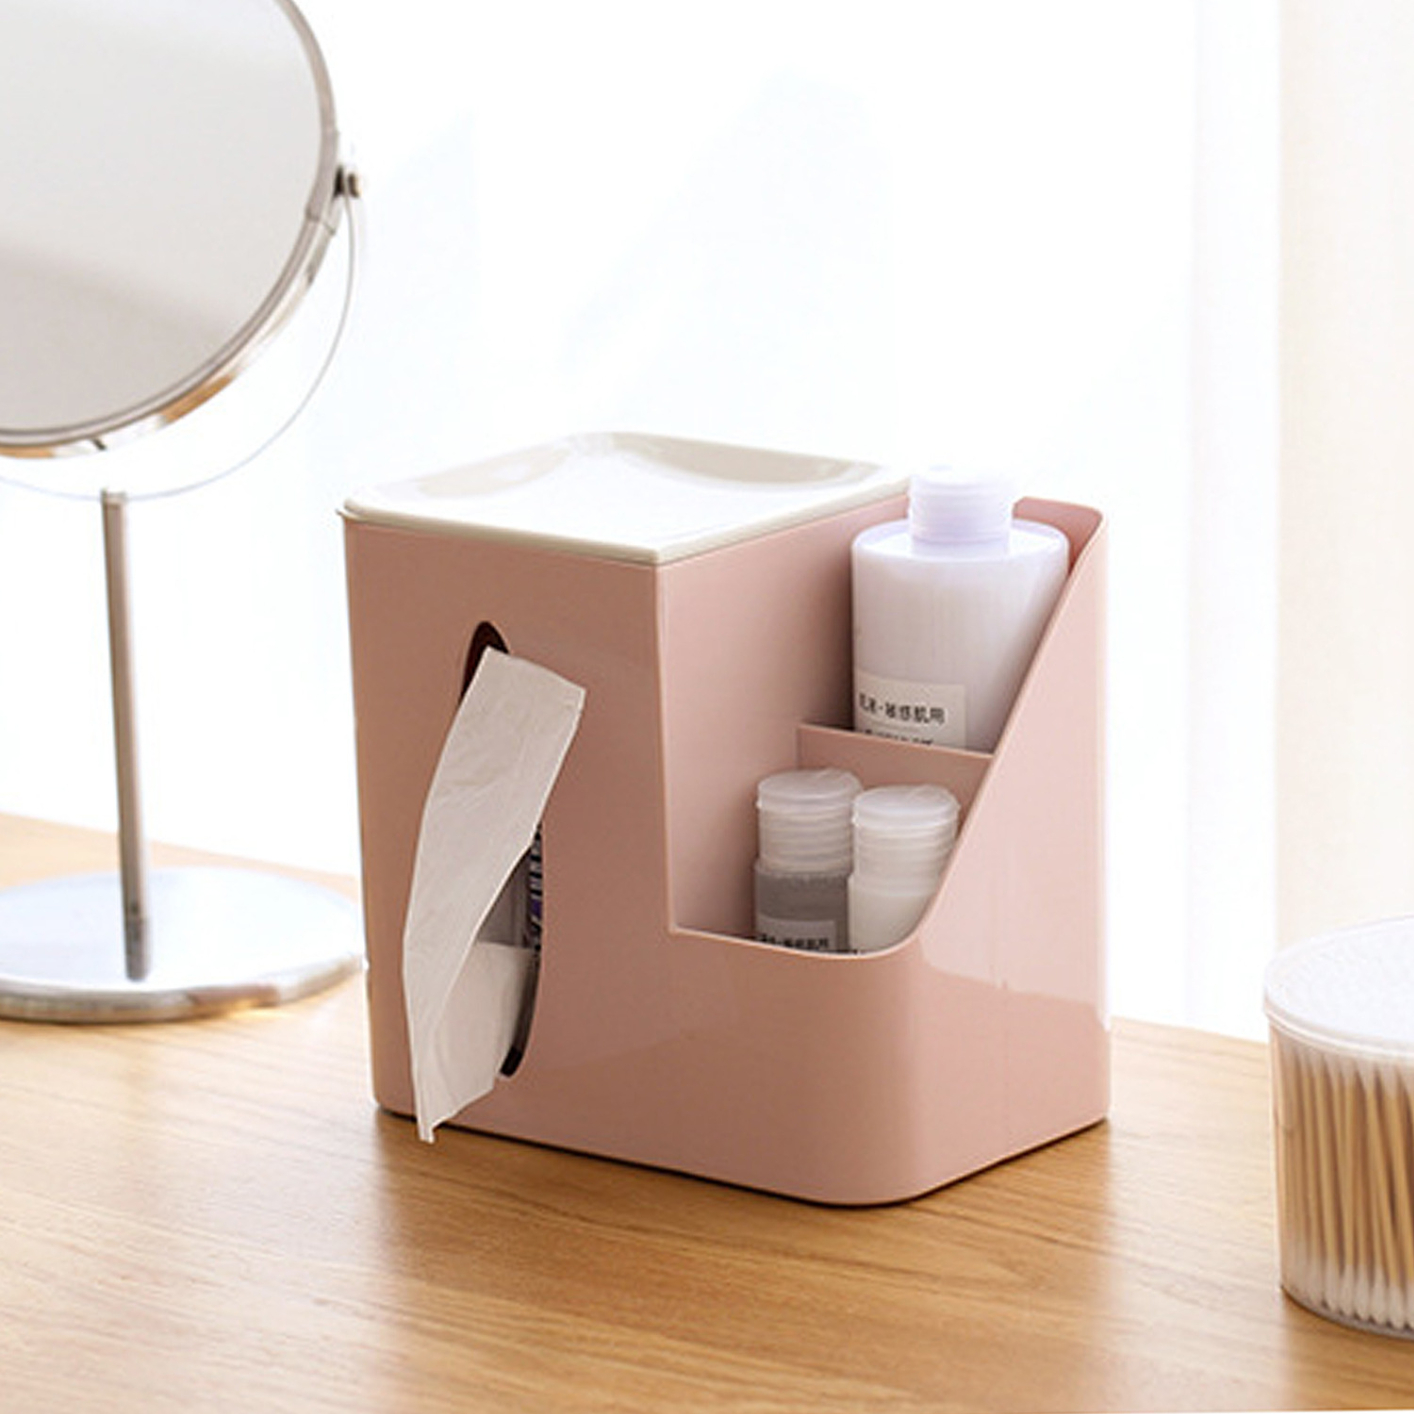 HT6068 Multifunction Plastic Tissue Box Desk Organizer Makeup Cosmetic Storage Box Sundries Container For Home